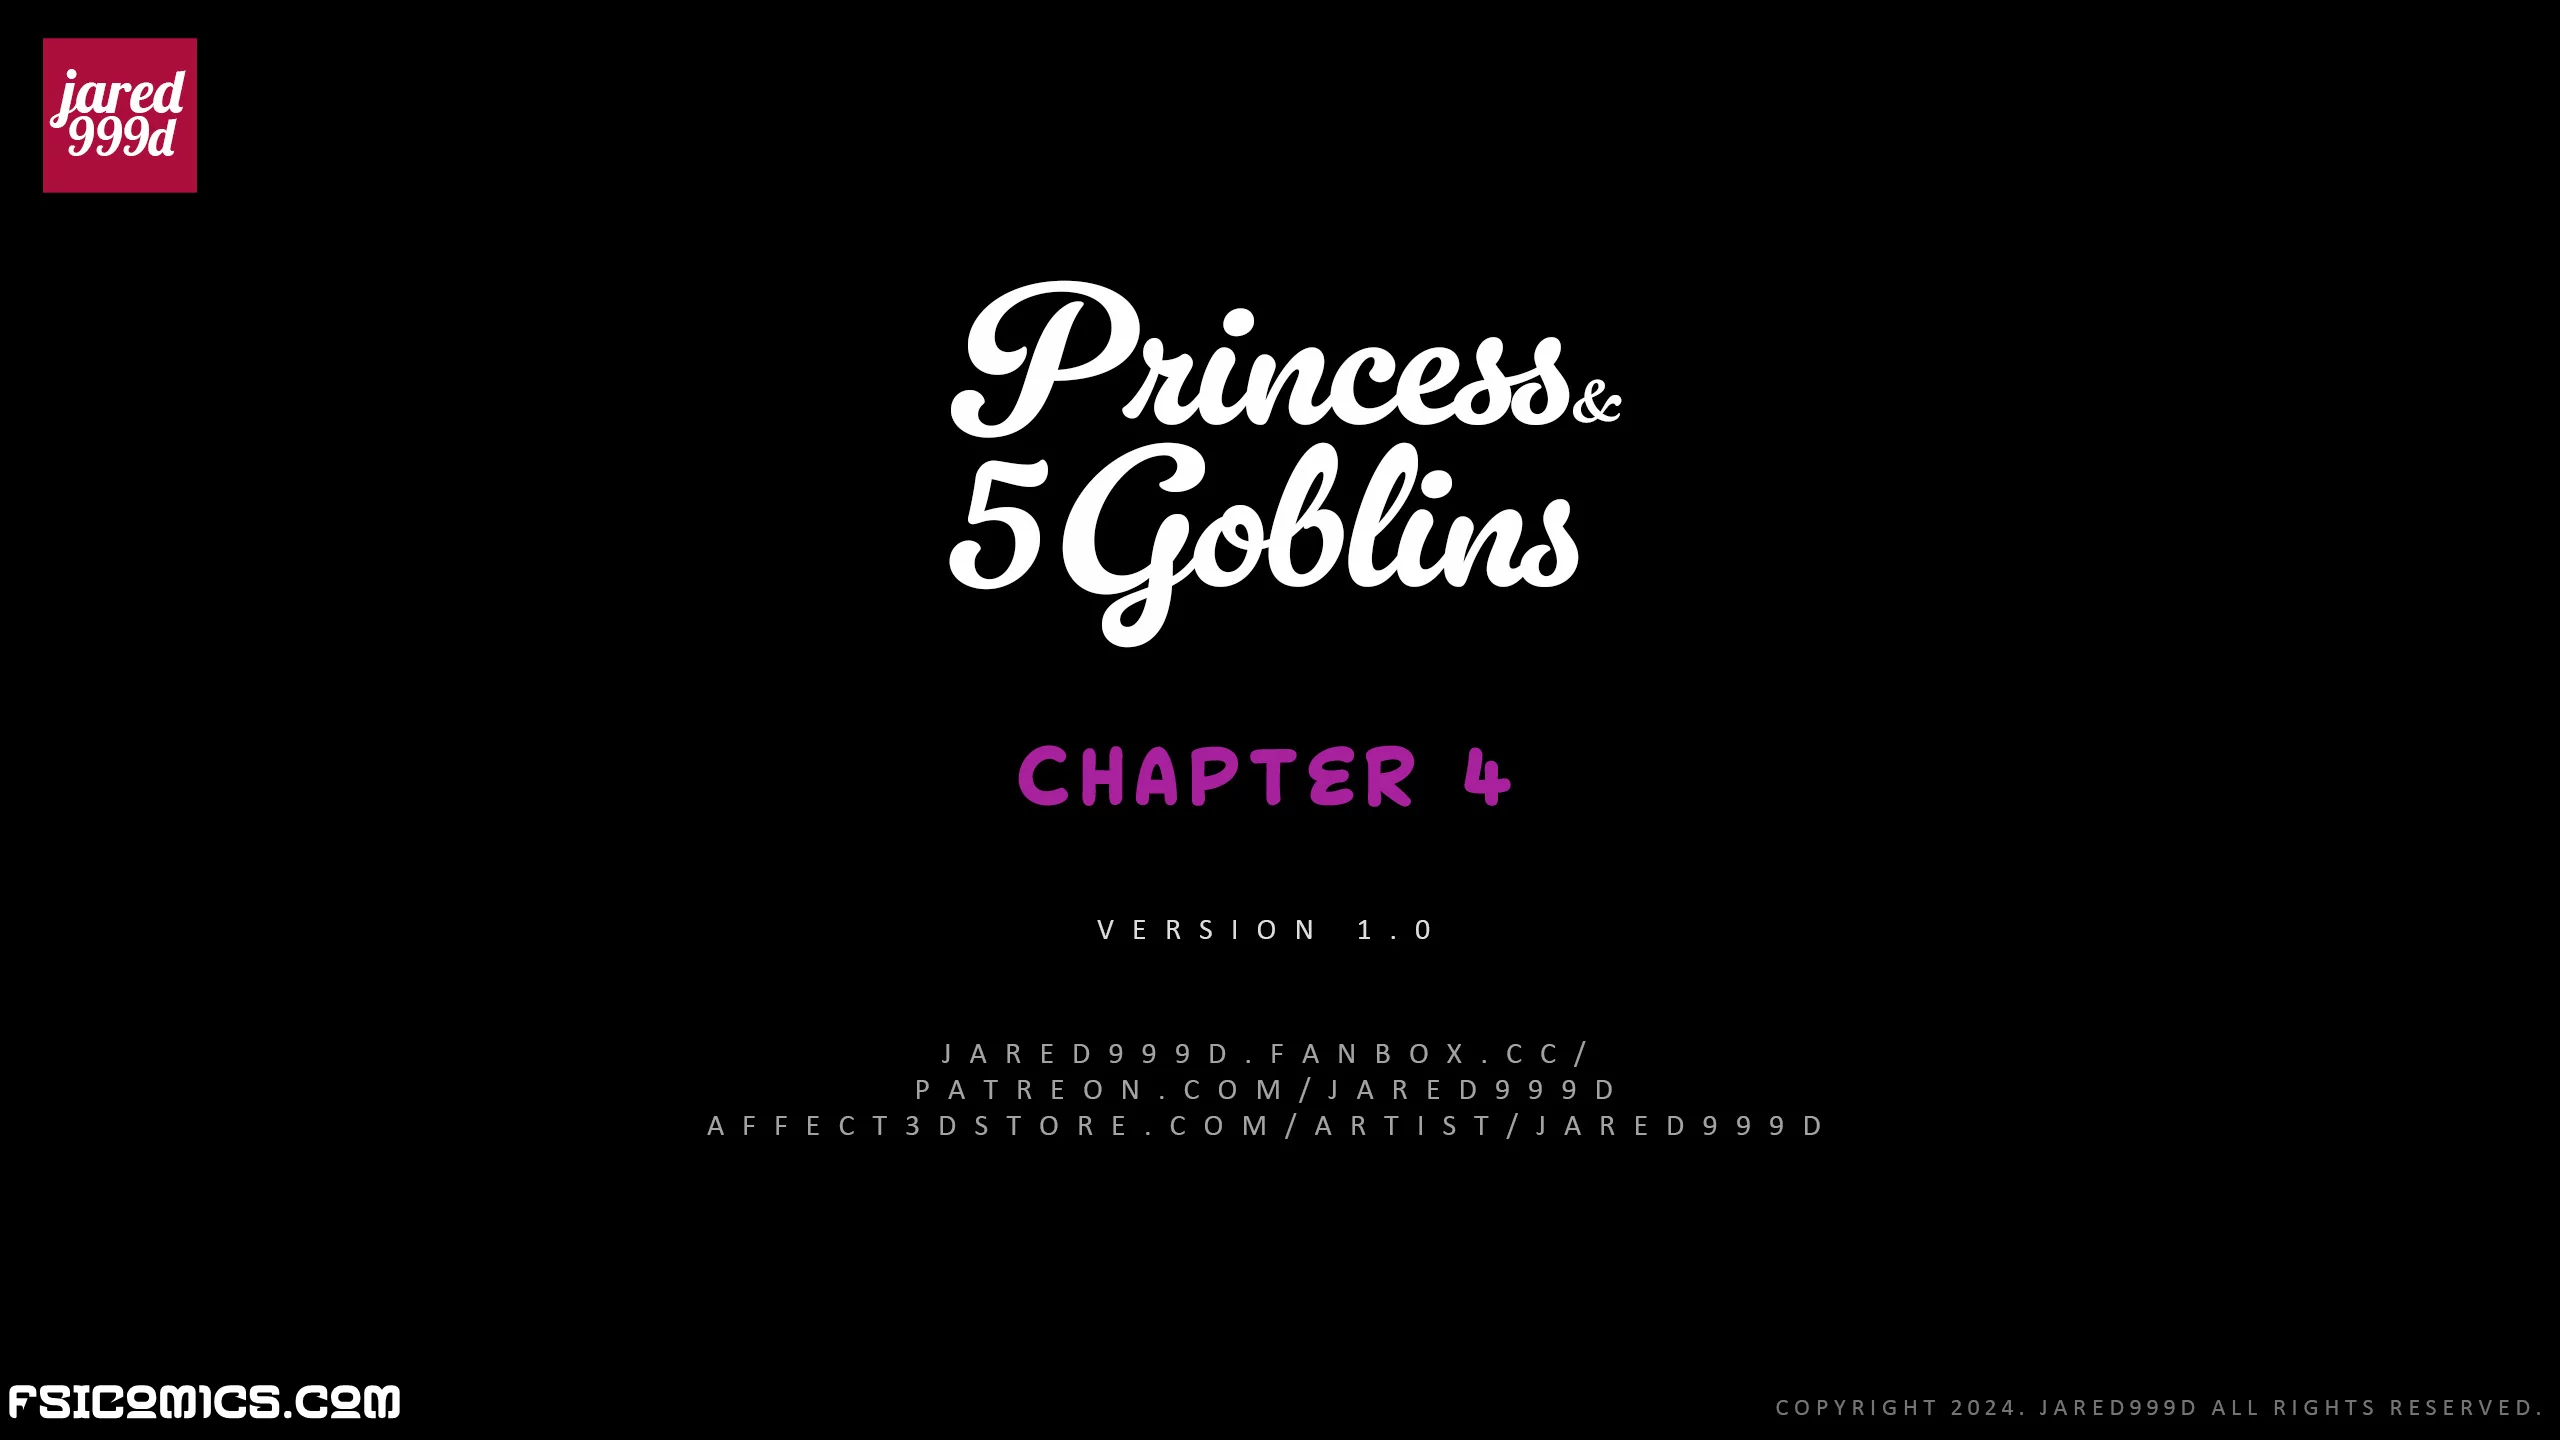 Princess And 5 Goblins Chapter 4 - Jared999D - 595 - FSIComics